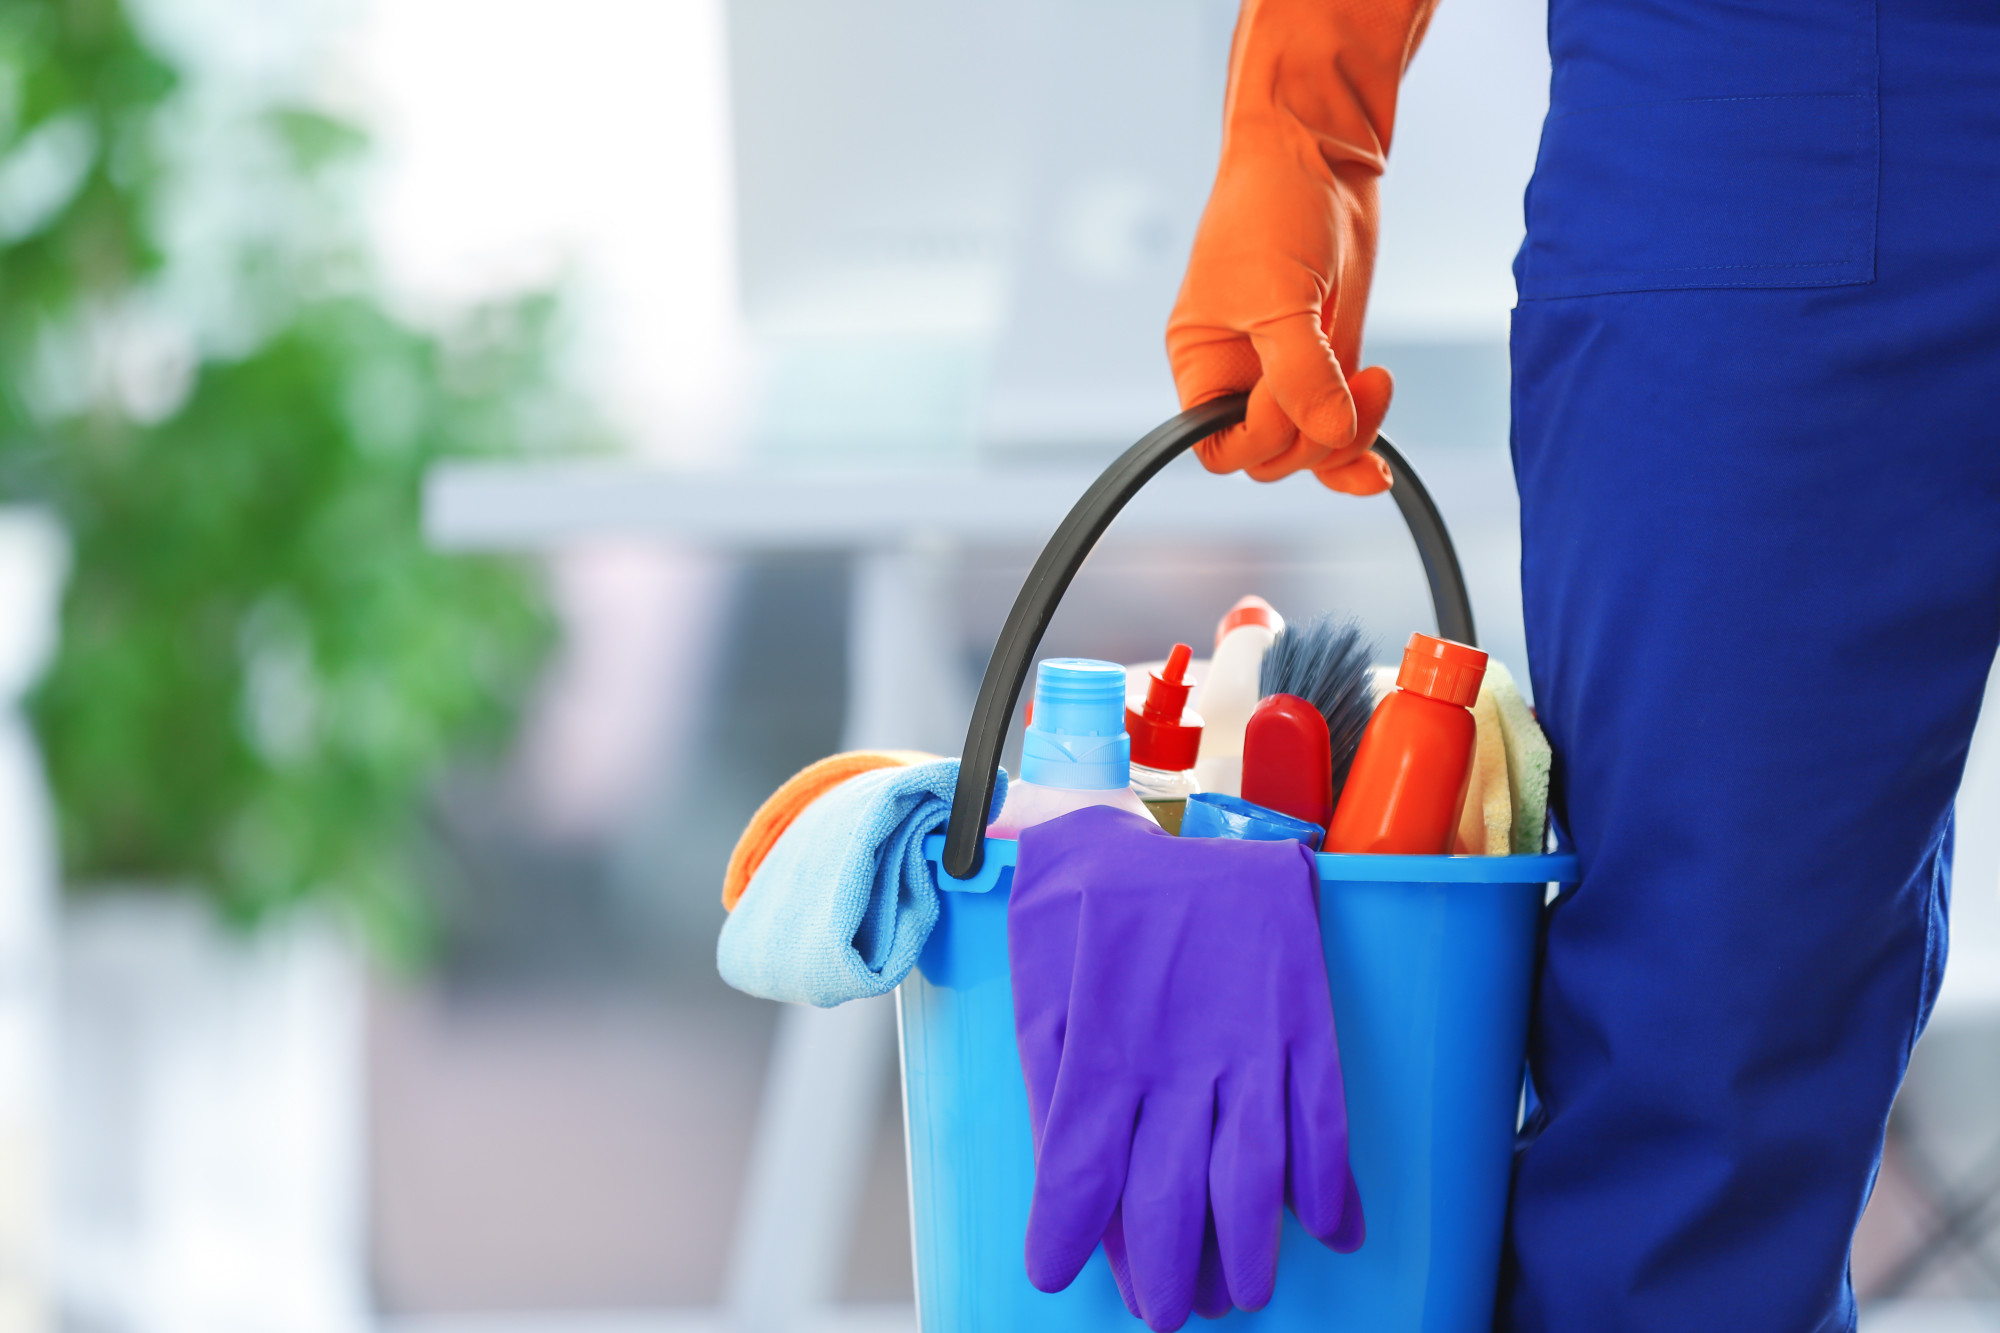 professional cleaning company